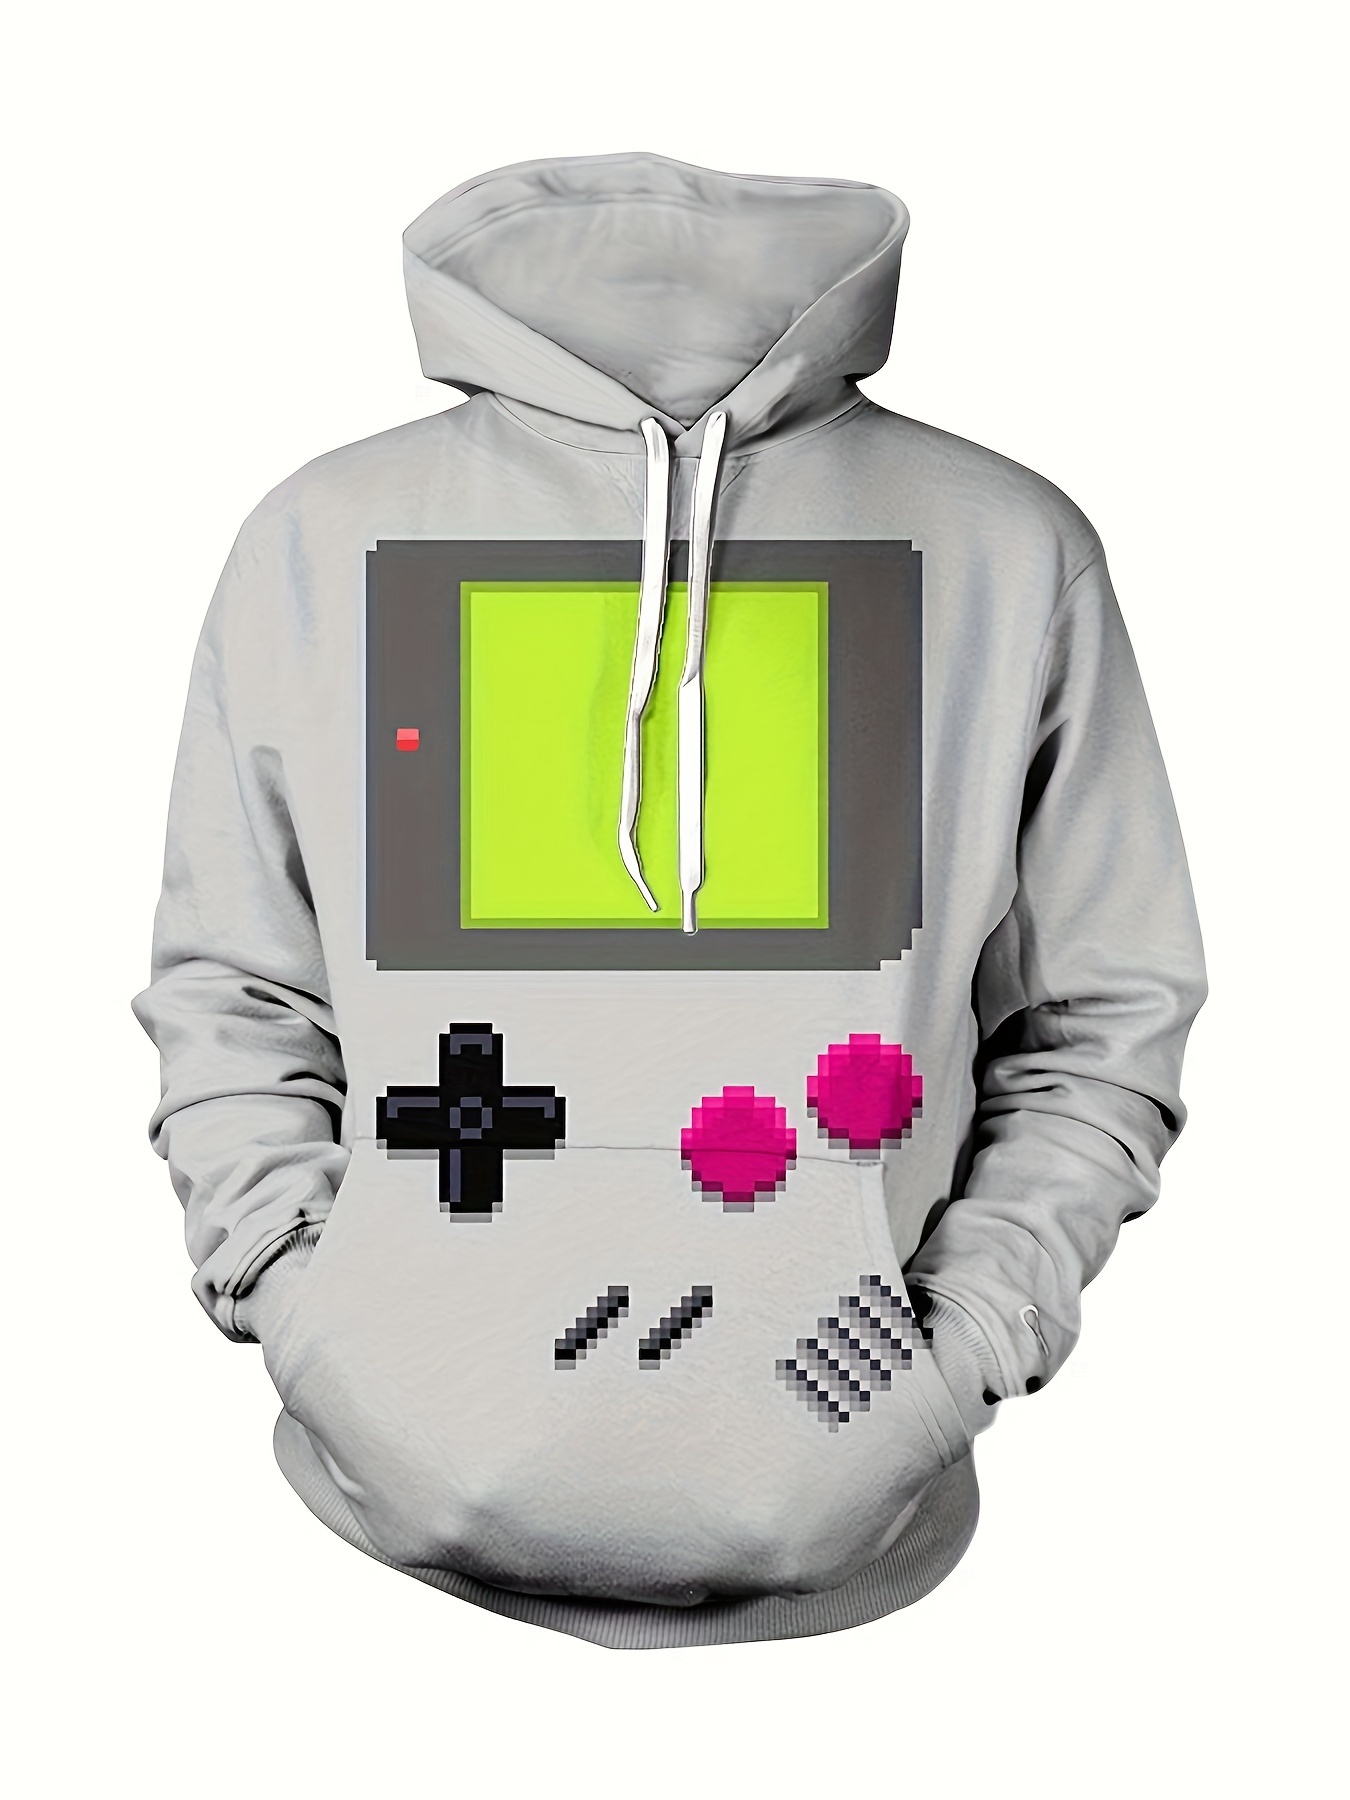 Men’s Casual Hoodie with Retro Game Design, Pullover Sweatshirt with Kangaroo Pocket, Streetwear for Autumn Winter, Perfect Gift for Gamers